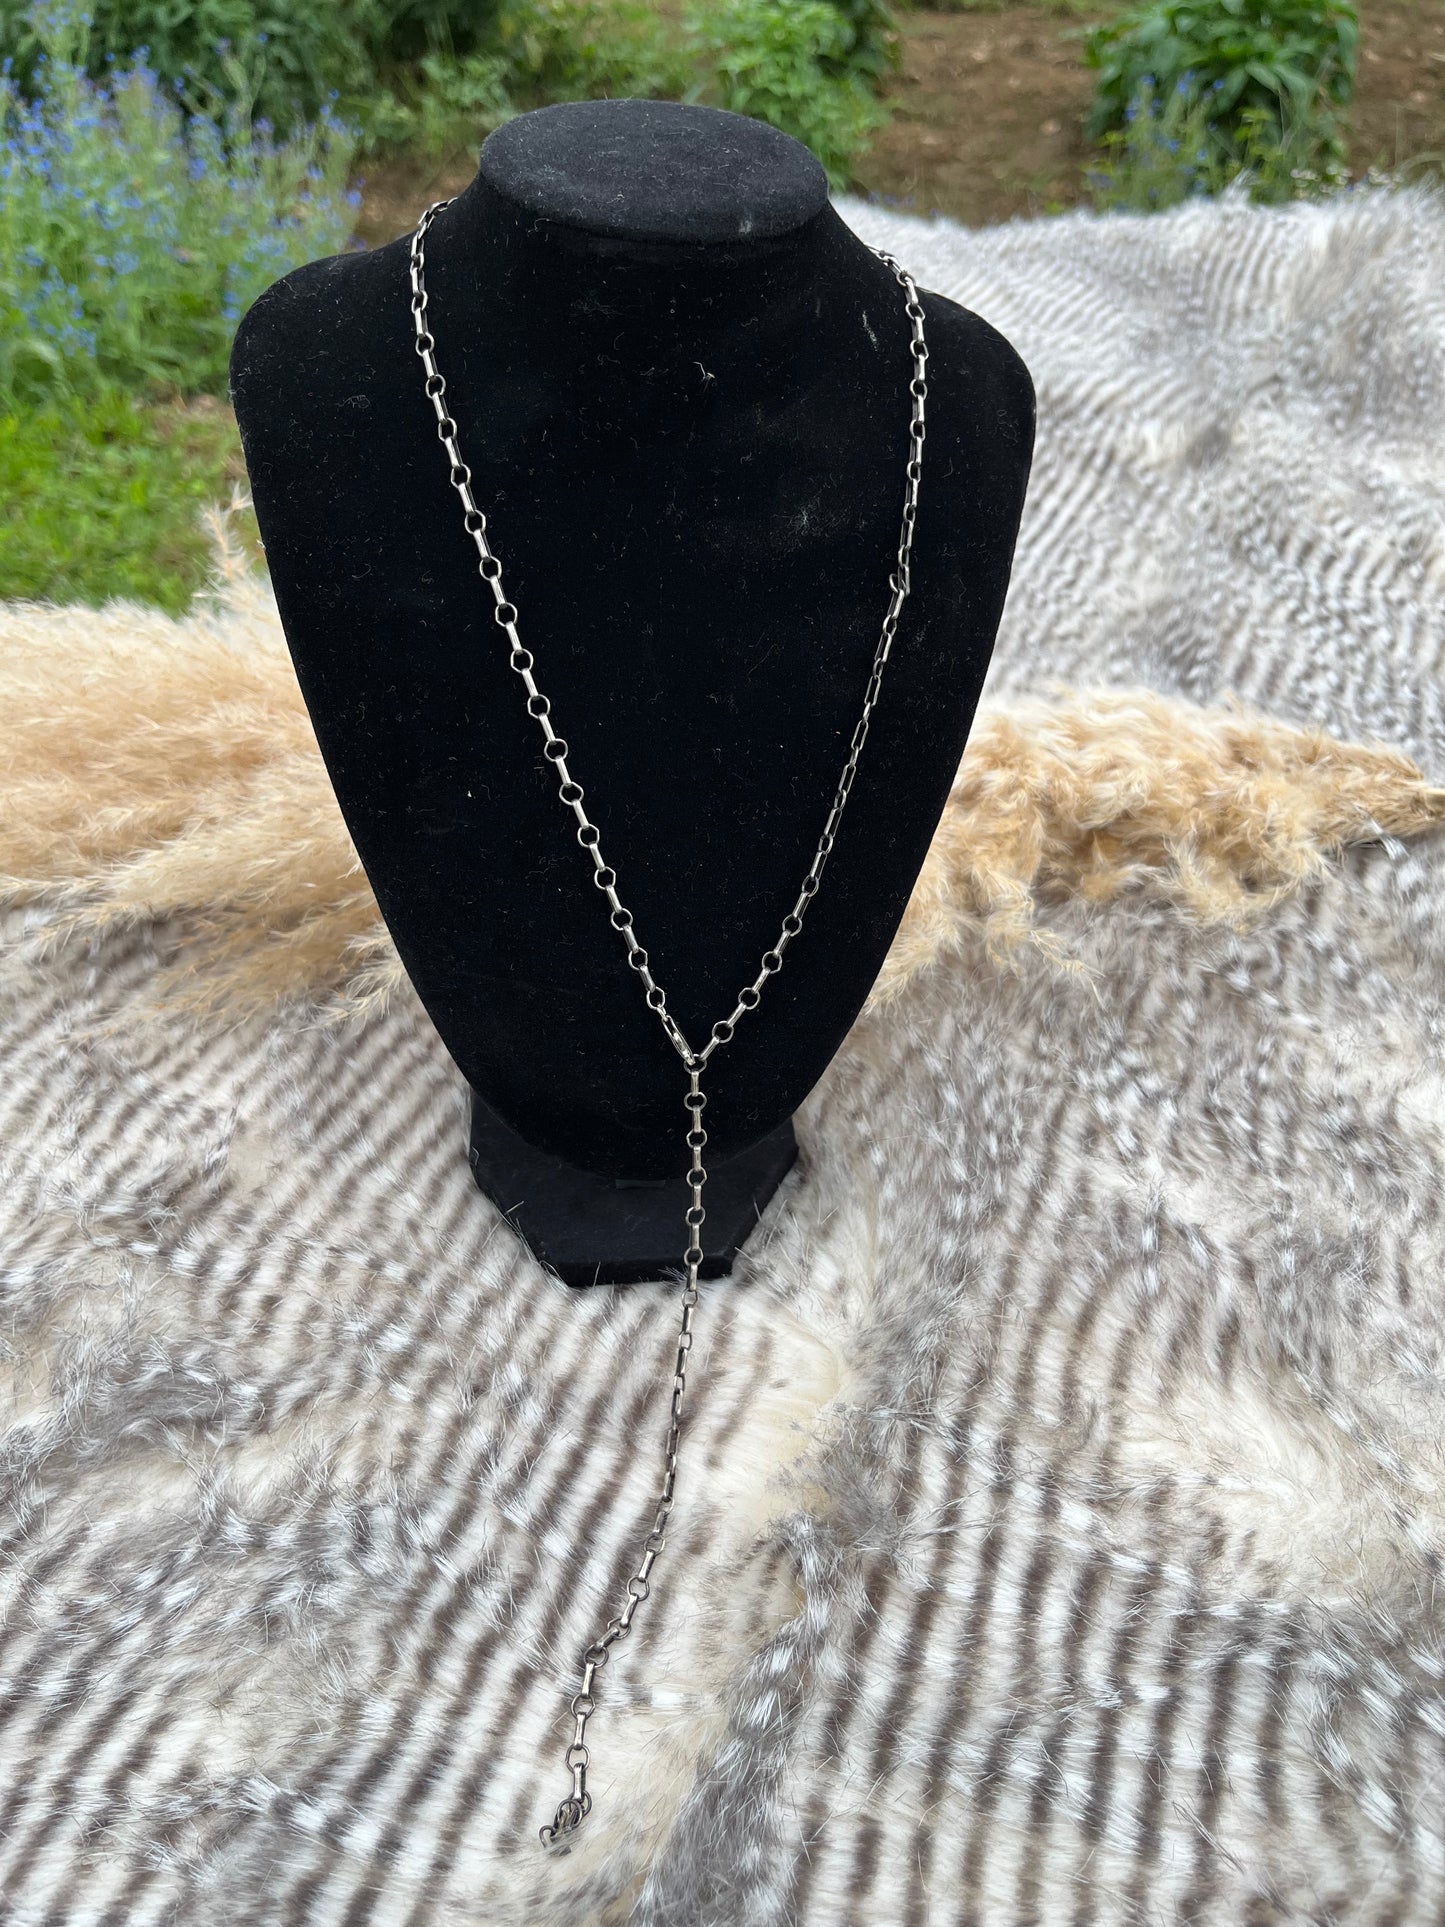 28" Antiqued Sterling Silver Chain